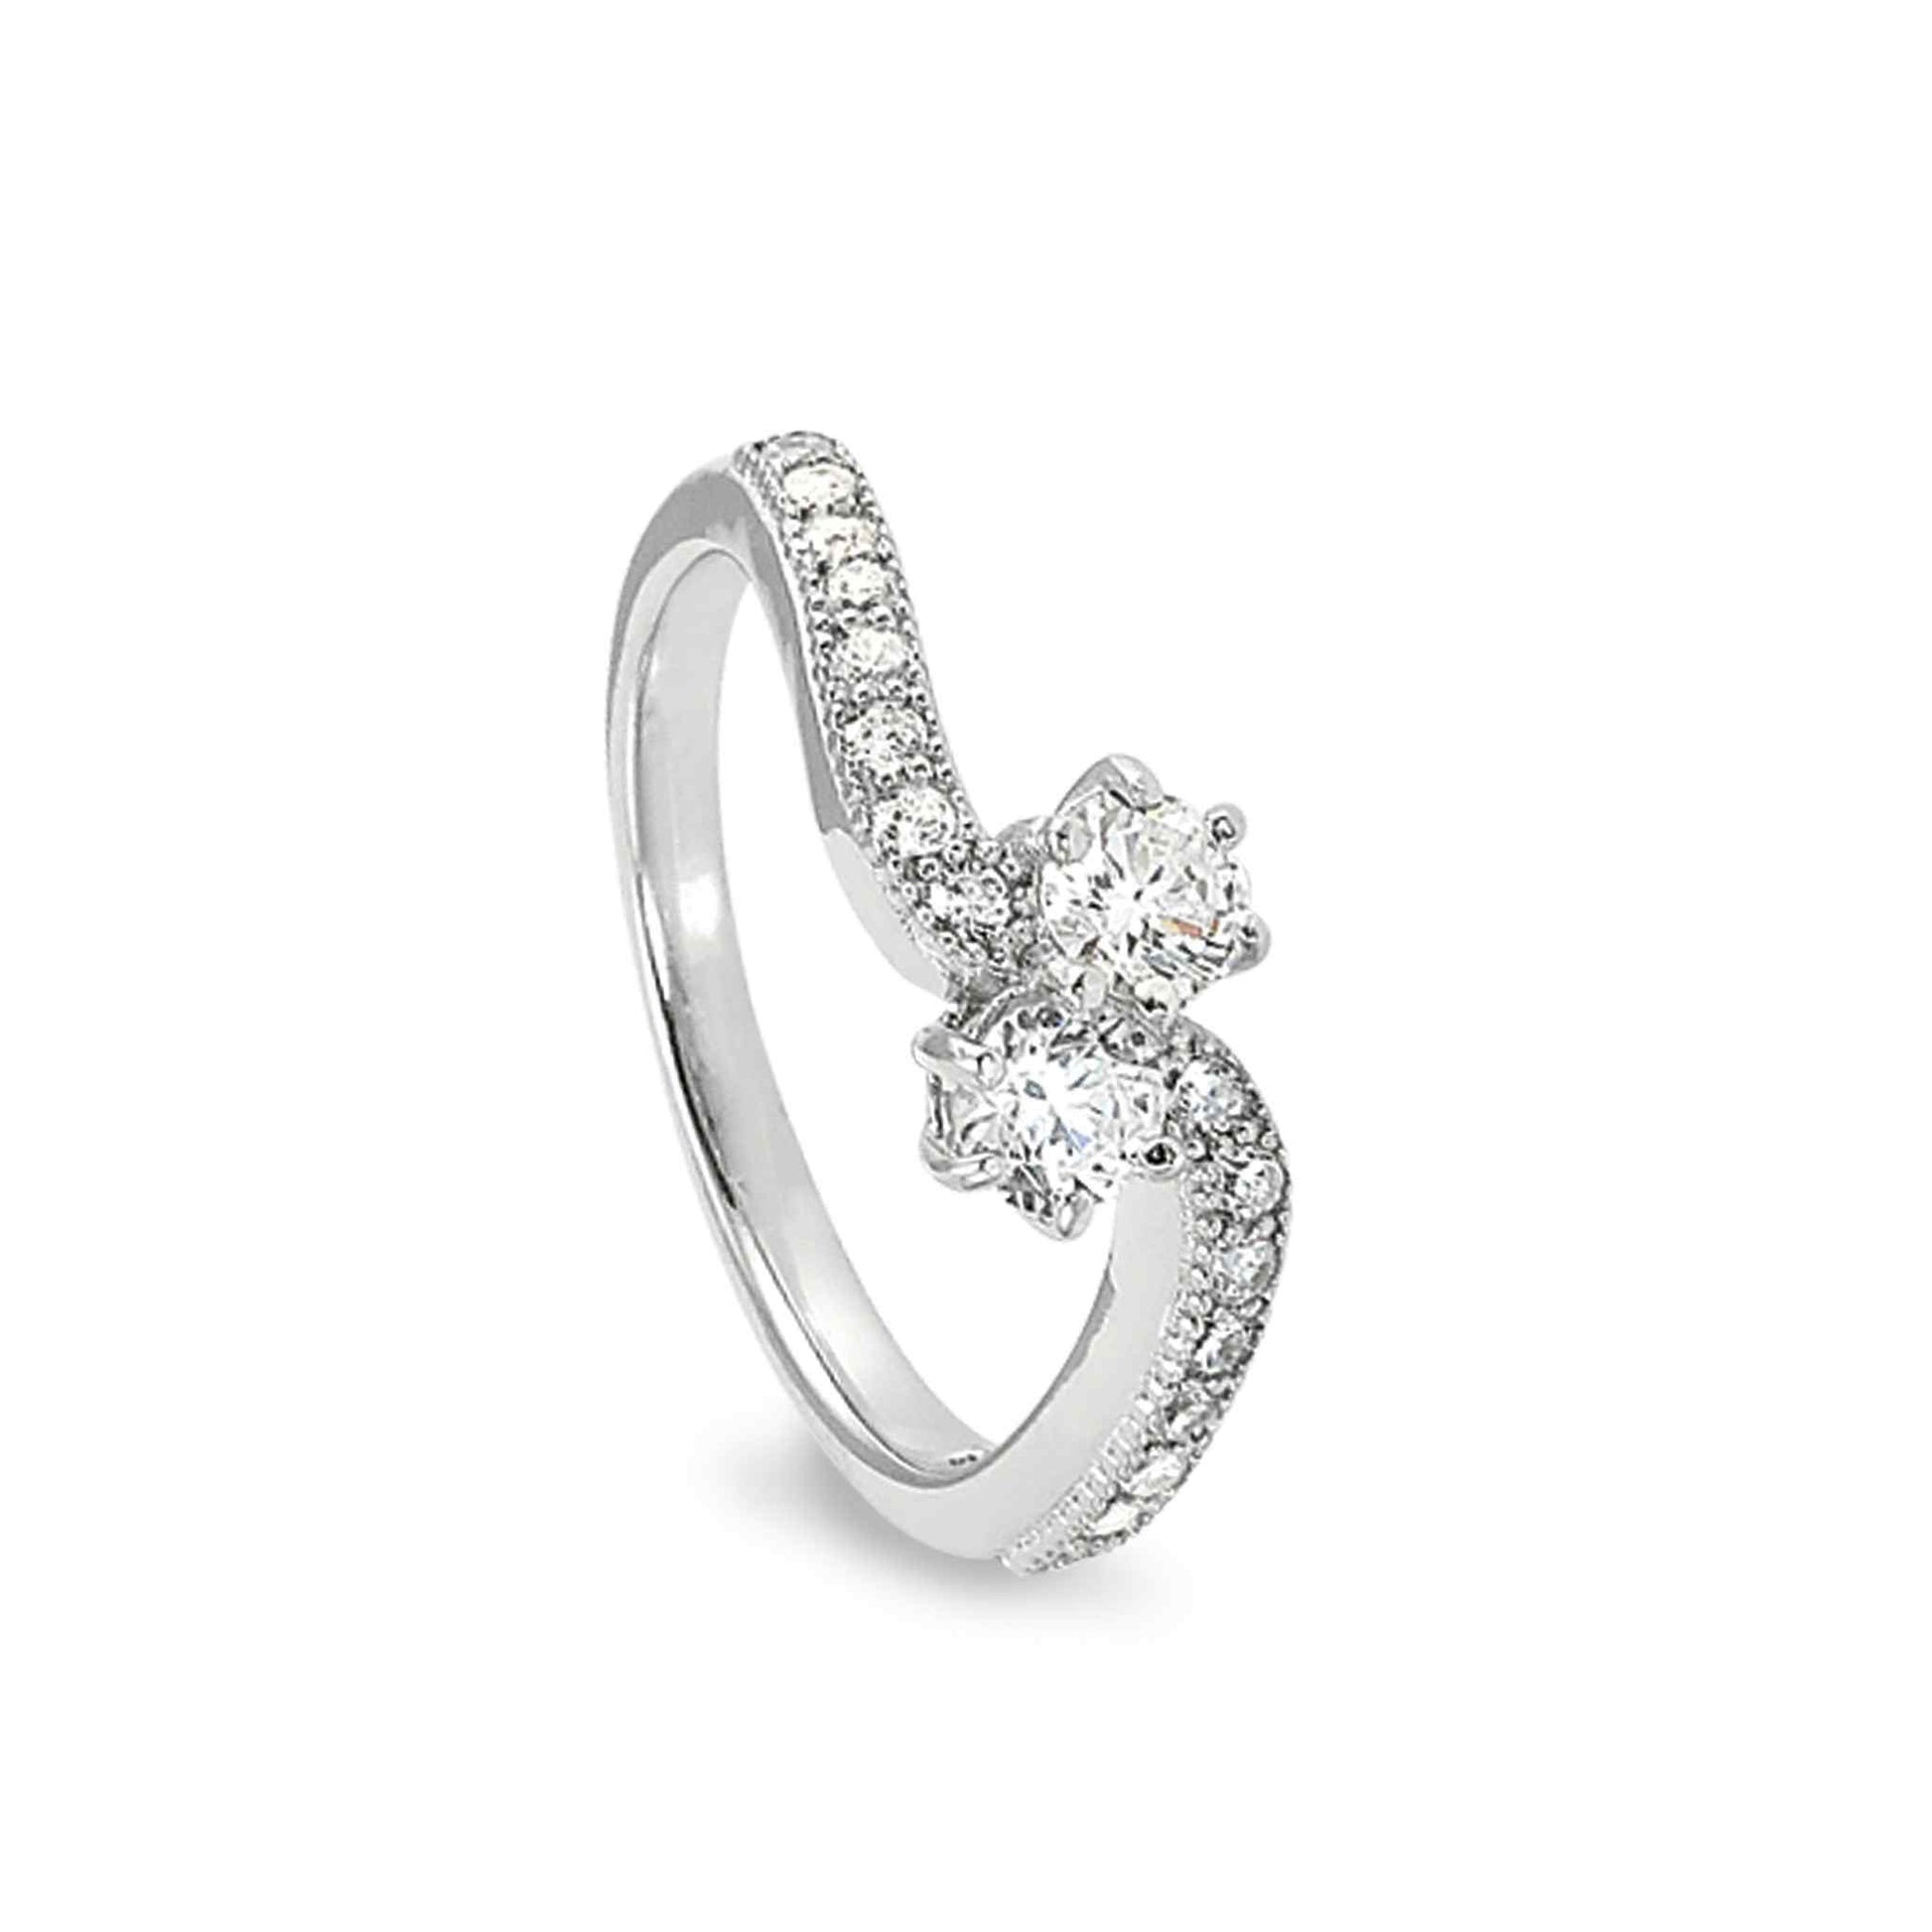 A twist band two stone ring with two 120 facet simulated diamonds displayed on a neutral white background.